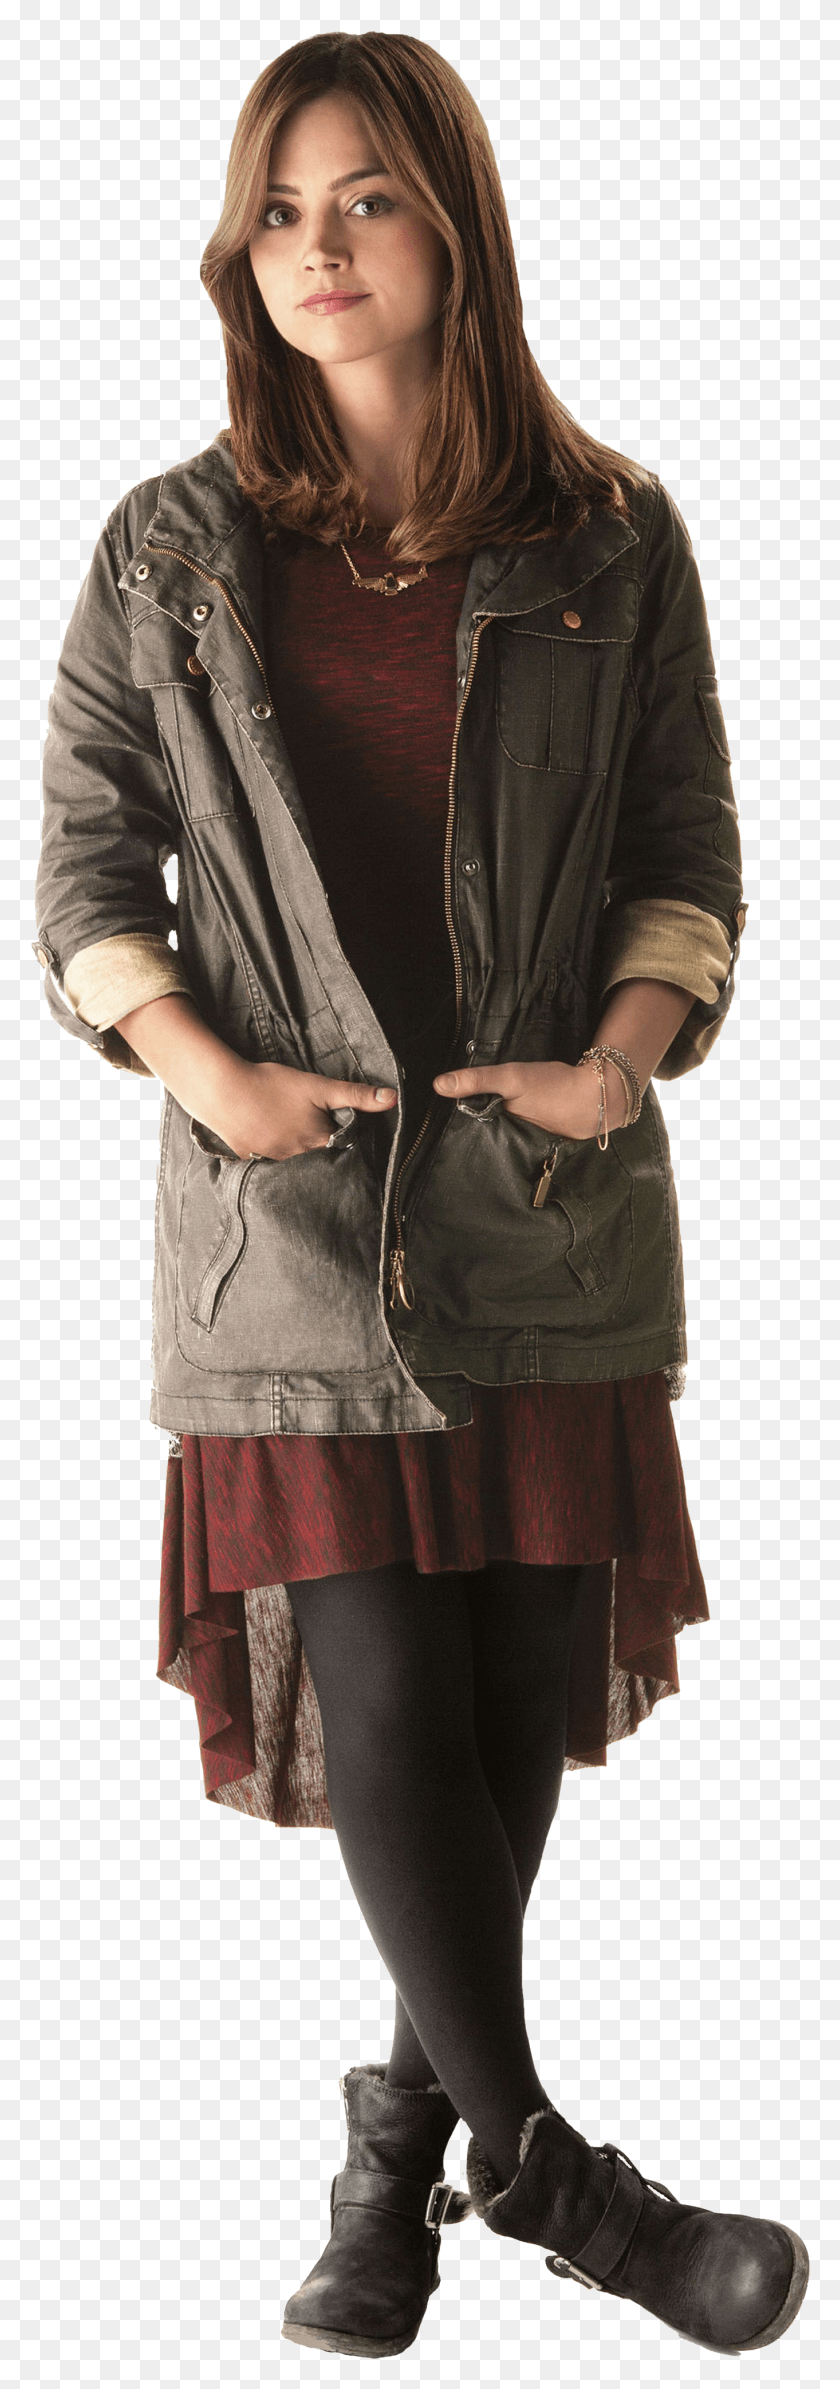 Dziesity Doktor Matt Smith Bella Doctor Who Outfits Doctor Who Clara Oswald The Bells Of Saint John HD PNG Download